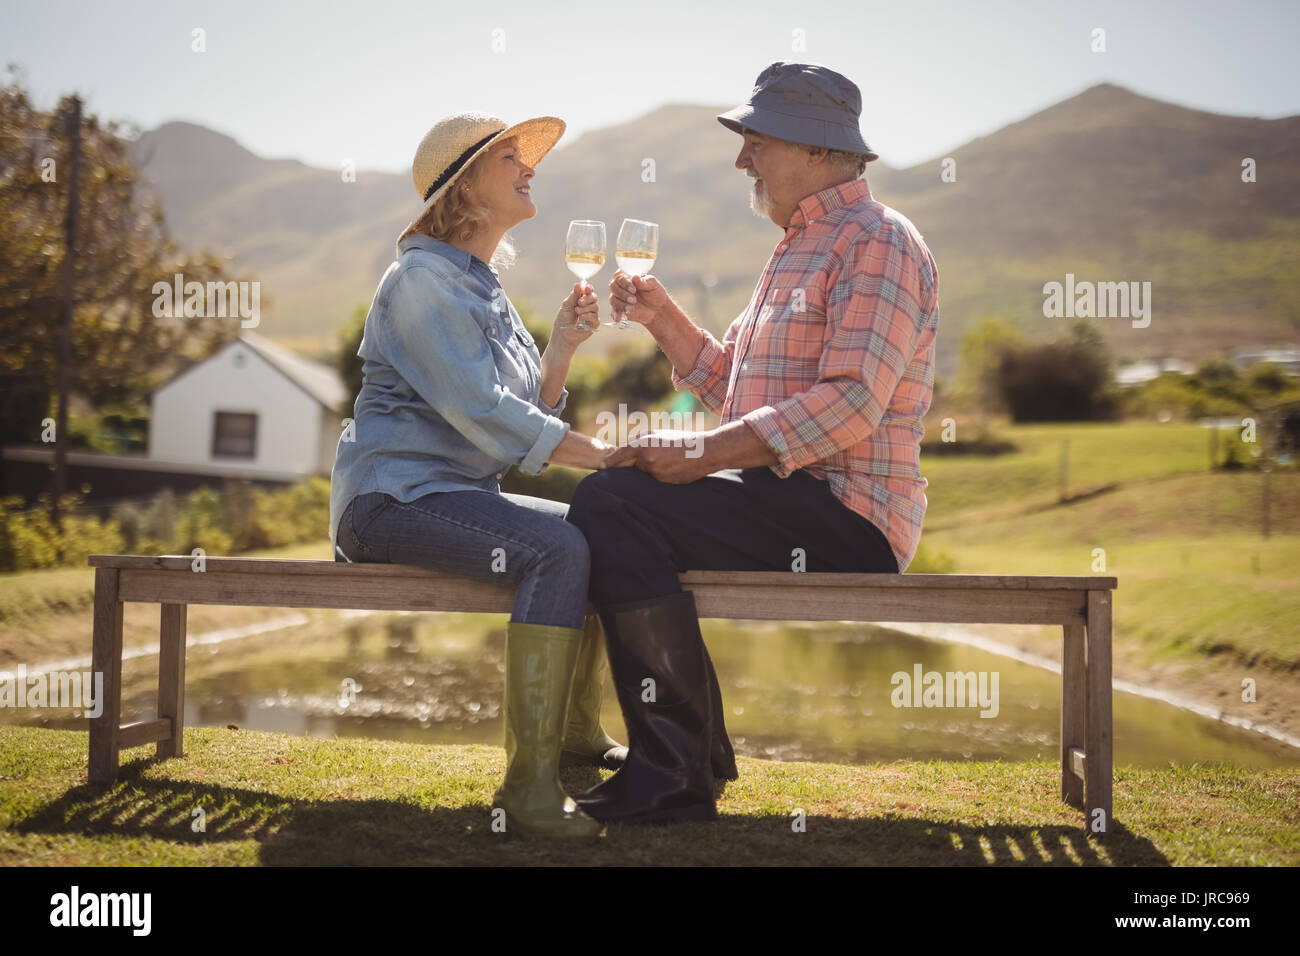 Smiling senior couple toasting glasses of wine while sitting on a bench in lawn Stock Photo